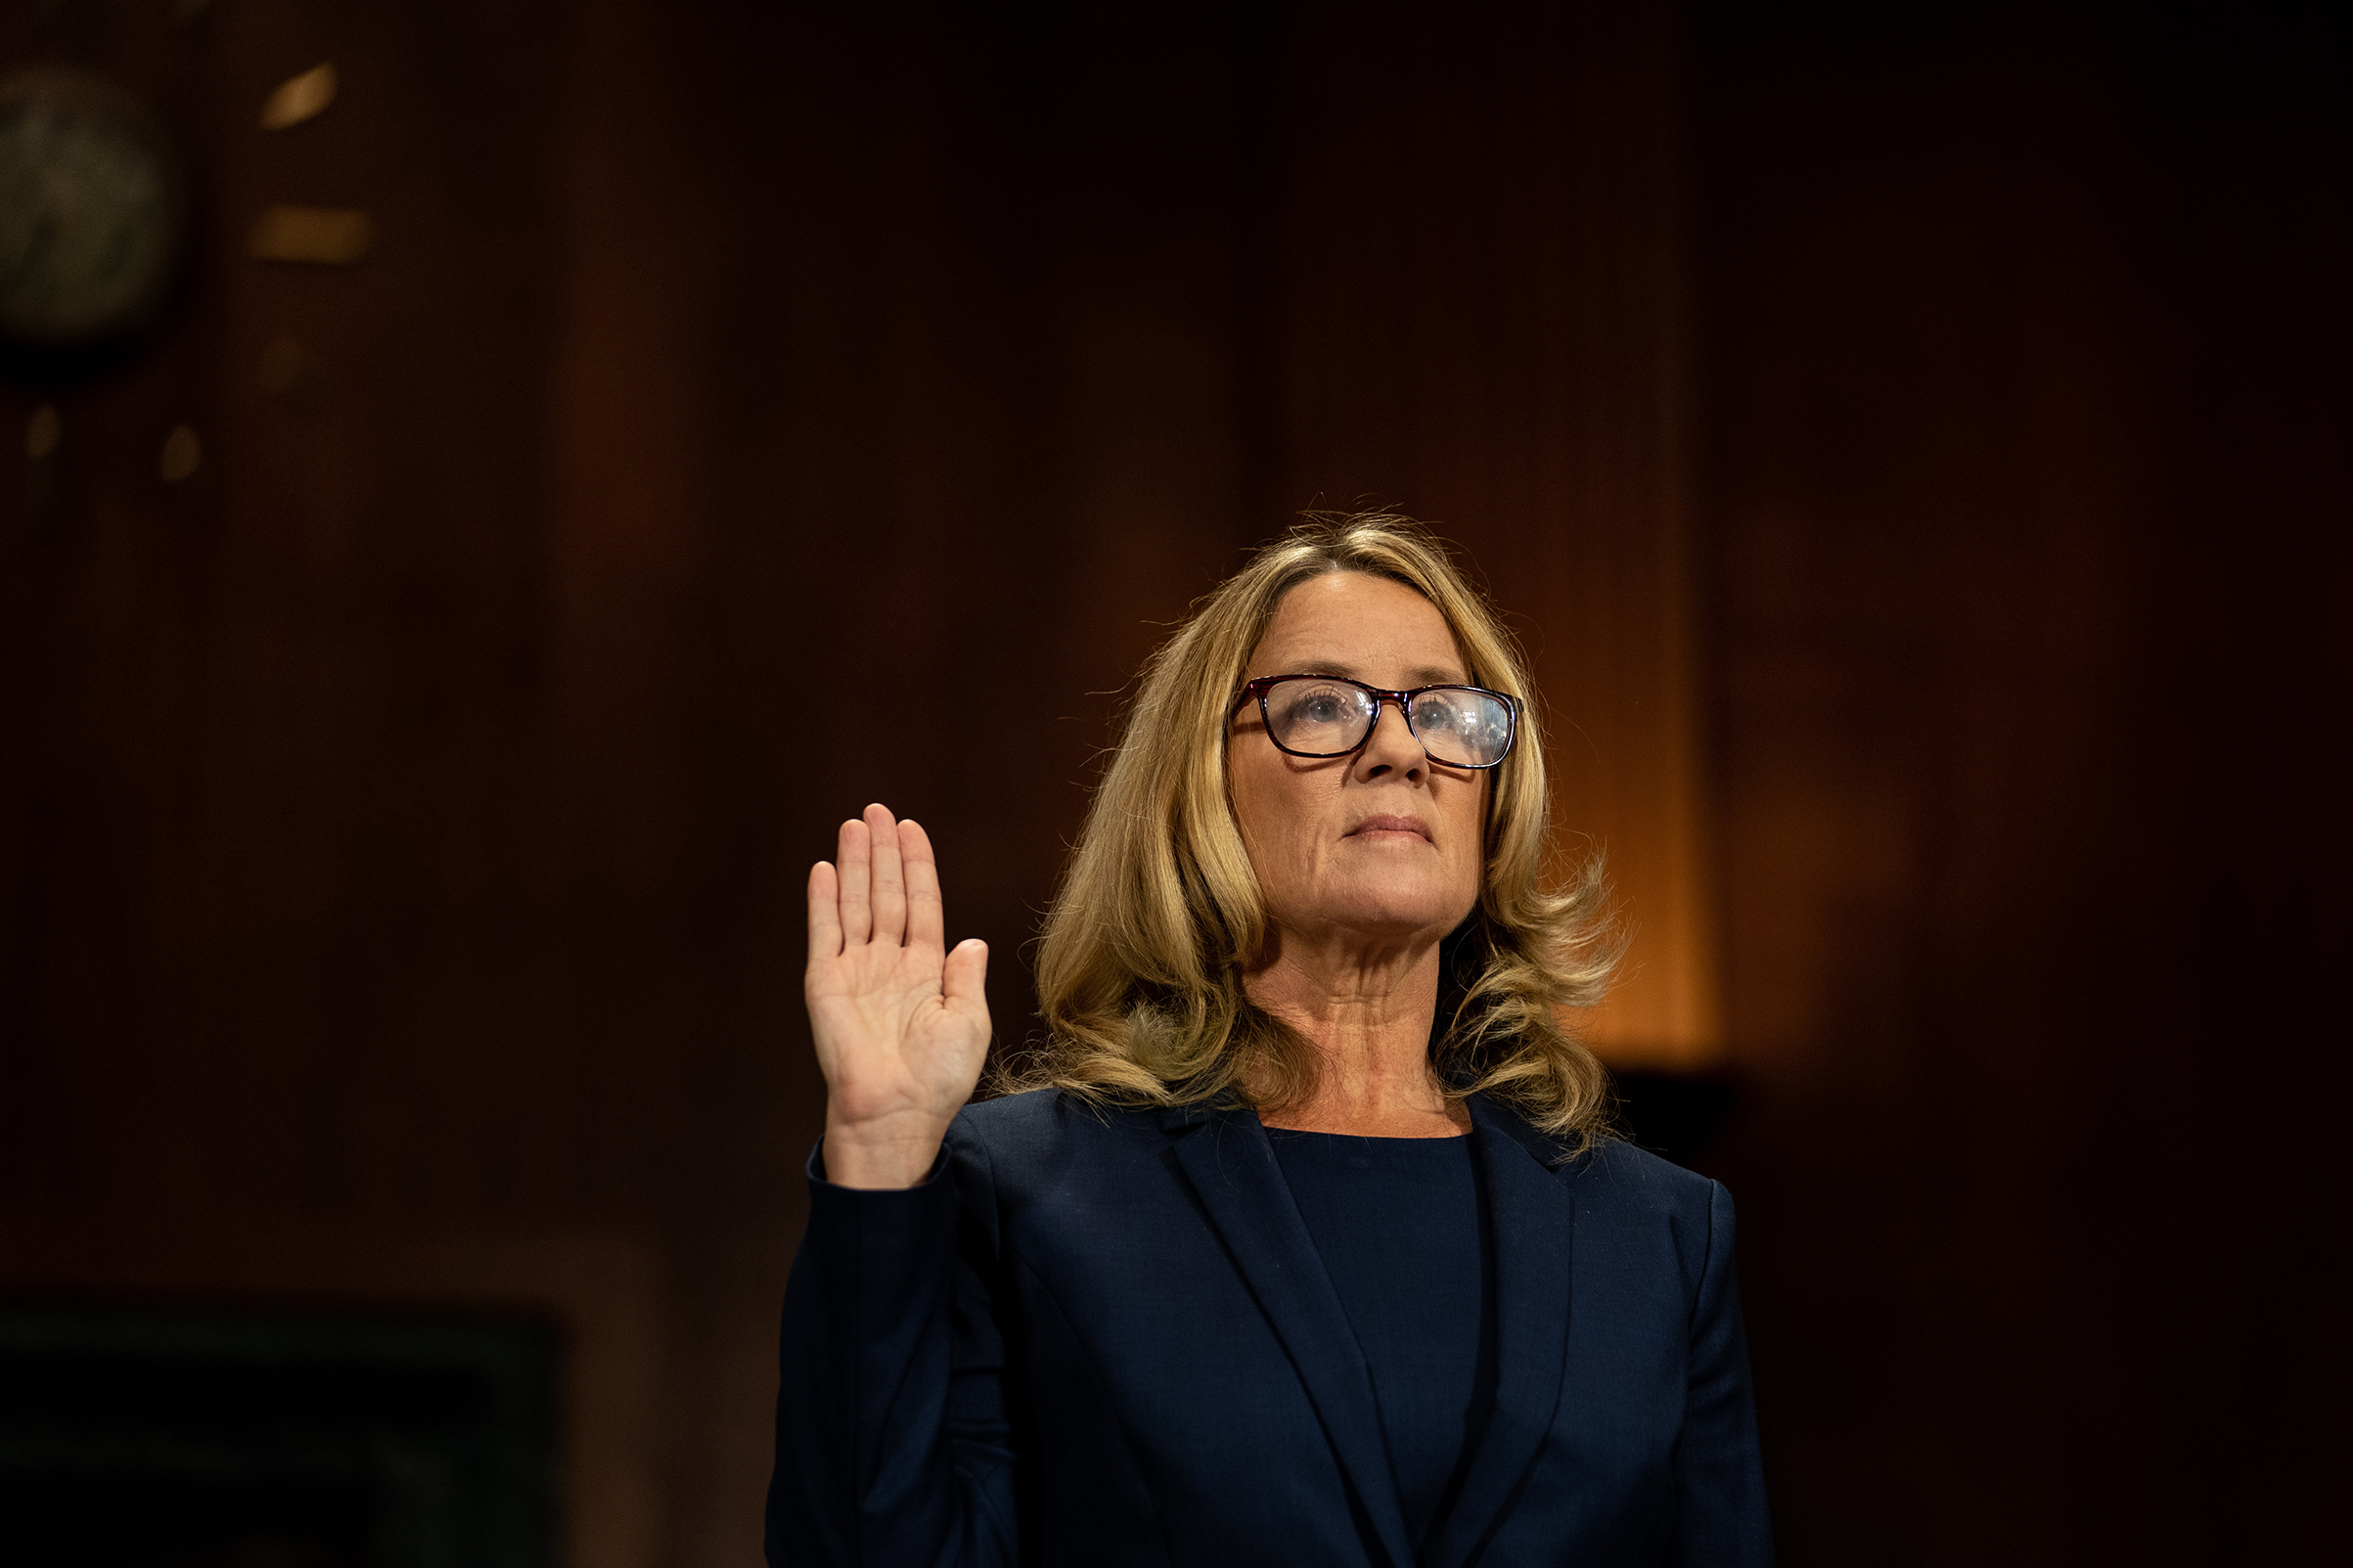 Christine Blasey Ford says Supreme Court nominee Brett Kavanaugh sexually assaulted her in high school (Erin Schaff—The New York Times/Pool/Getty Images)